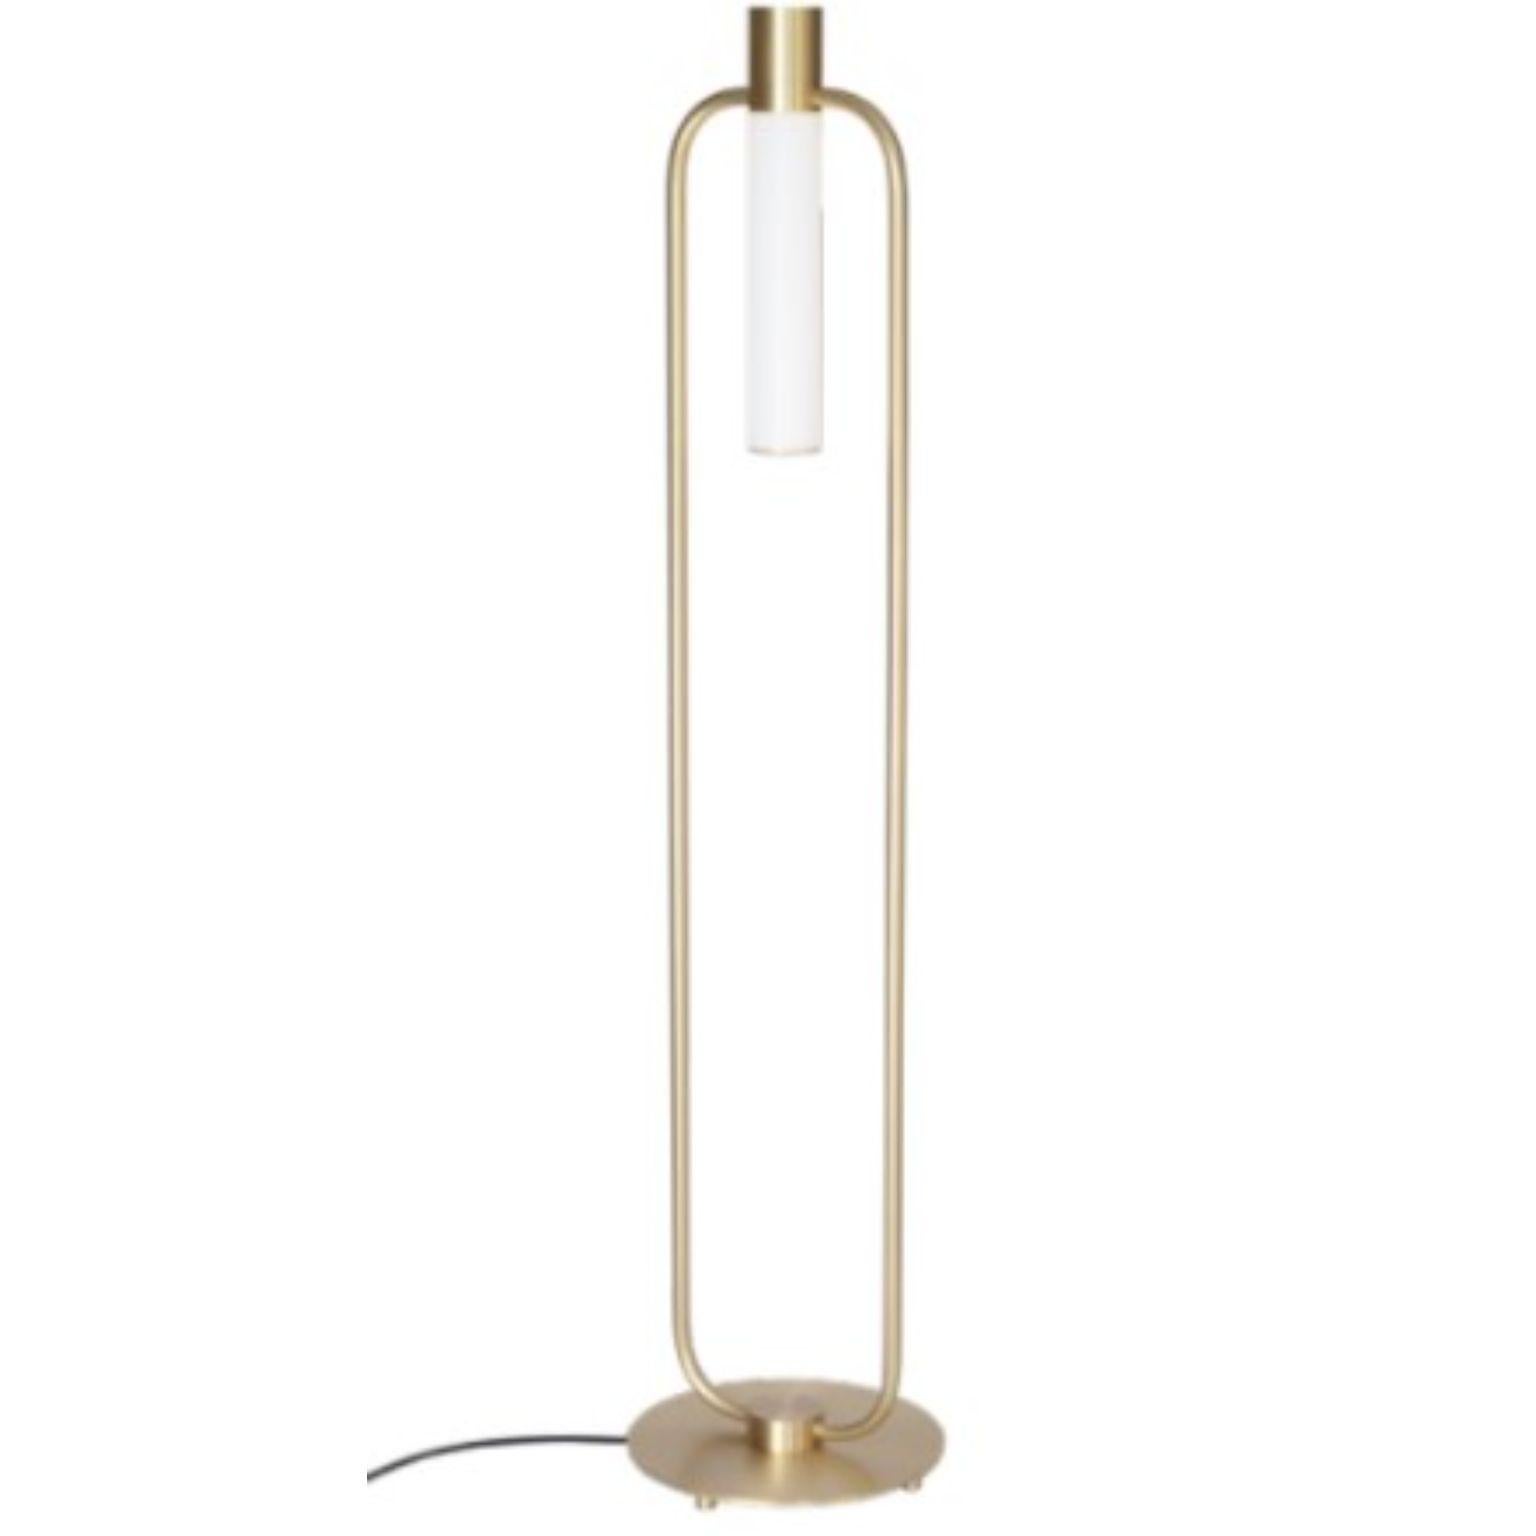 Storm floor lamp by Emilie Cathelineau
Dimensions: D 26 x W 7 x H 146 cm
Materials: Solid brass, white polycarbonate.
Others finishes are available.

All our lamps can be wired according to each country. If sold to the USA it will be wired for